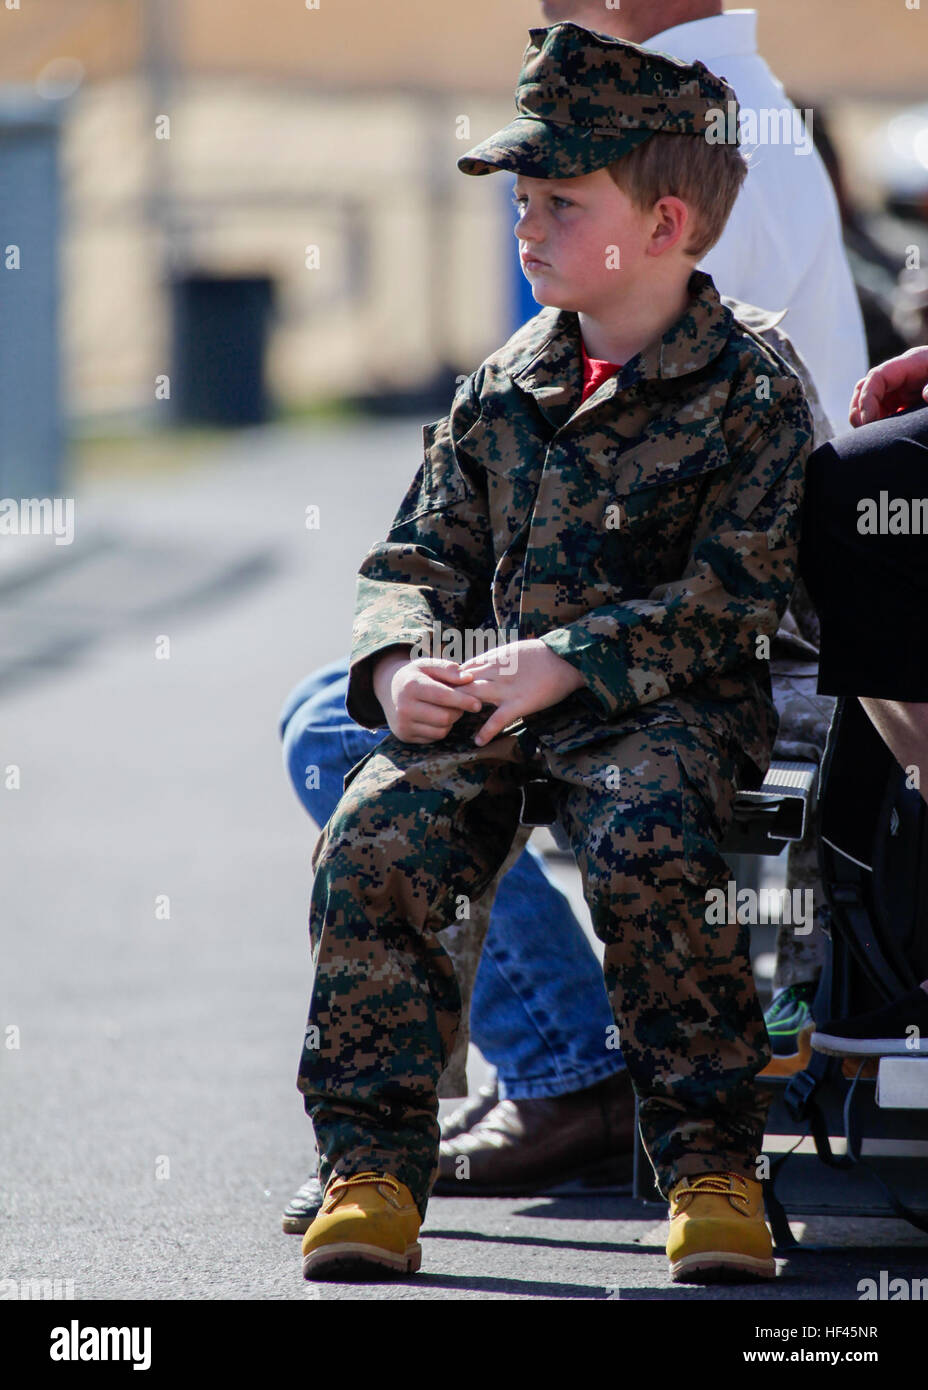 A young boy dressed in camouflage sits in the stands during the annual Marine Corps Birthday Pageant commemorating 241 years of the United States Marine Corps on Camp Pendleton, Calif., Nov. 9, 2016 (U.S. Marine Corps photo by GySgt Ismael Pena) MCI-West-IMEF Celebrate the 241st Marine Corps Birthday 161109-M-CX588-135 Stock Photo